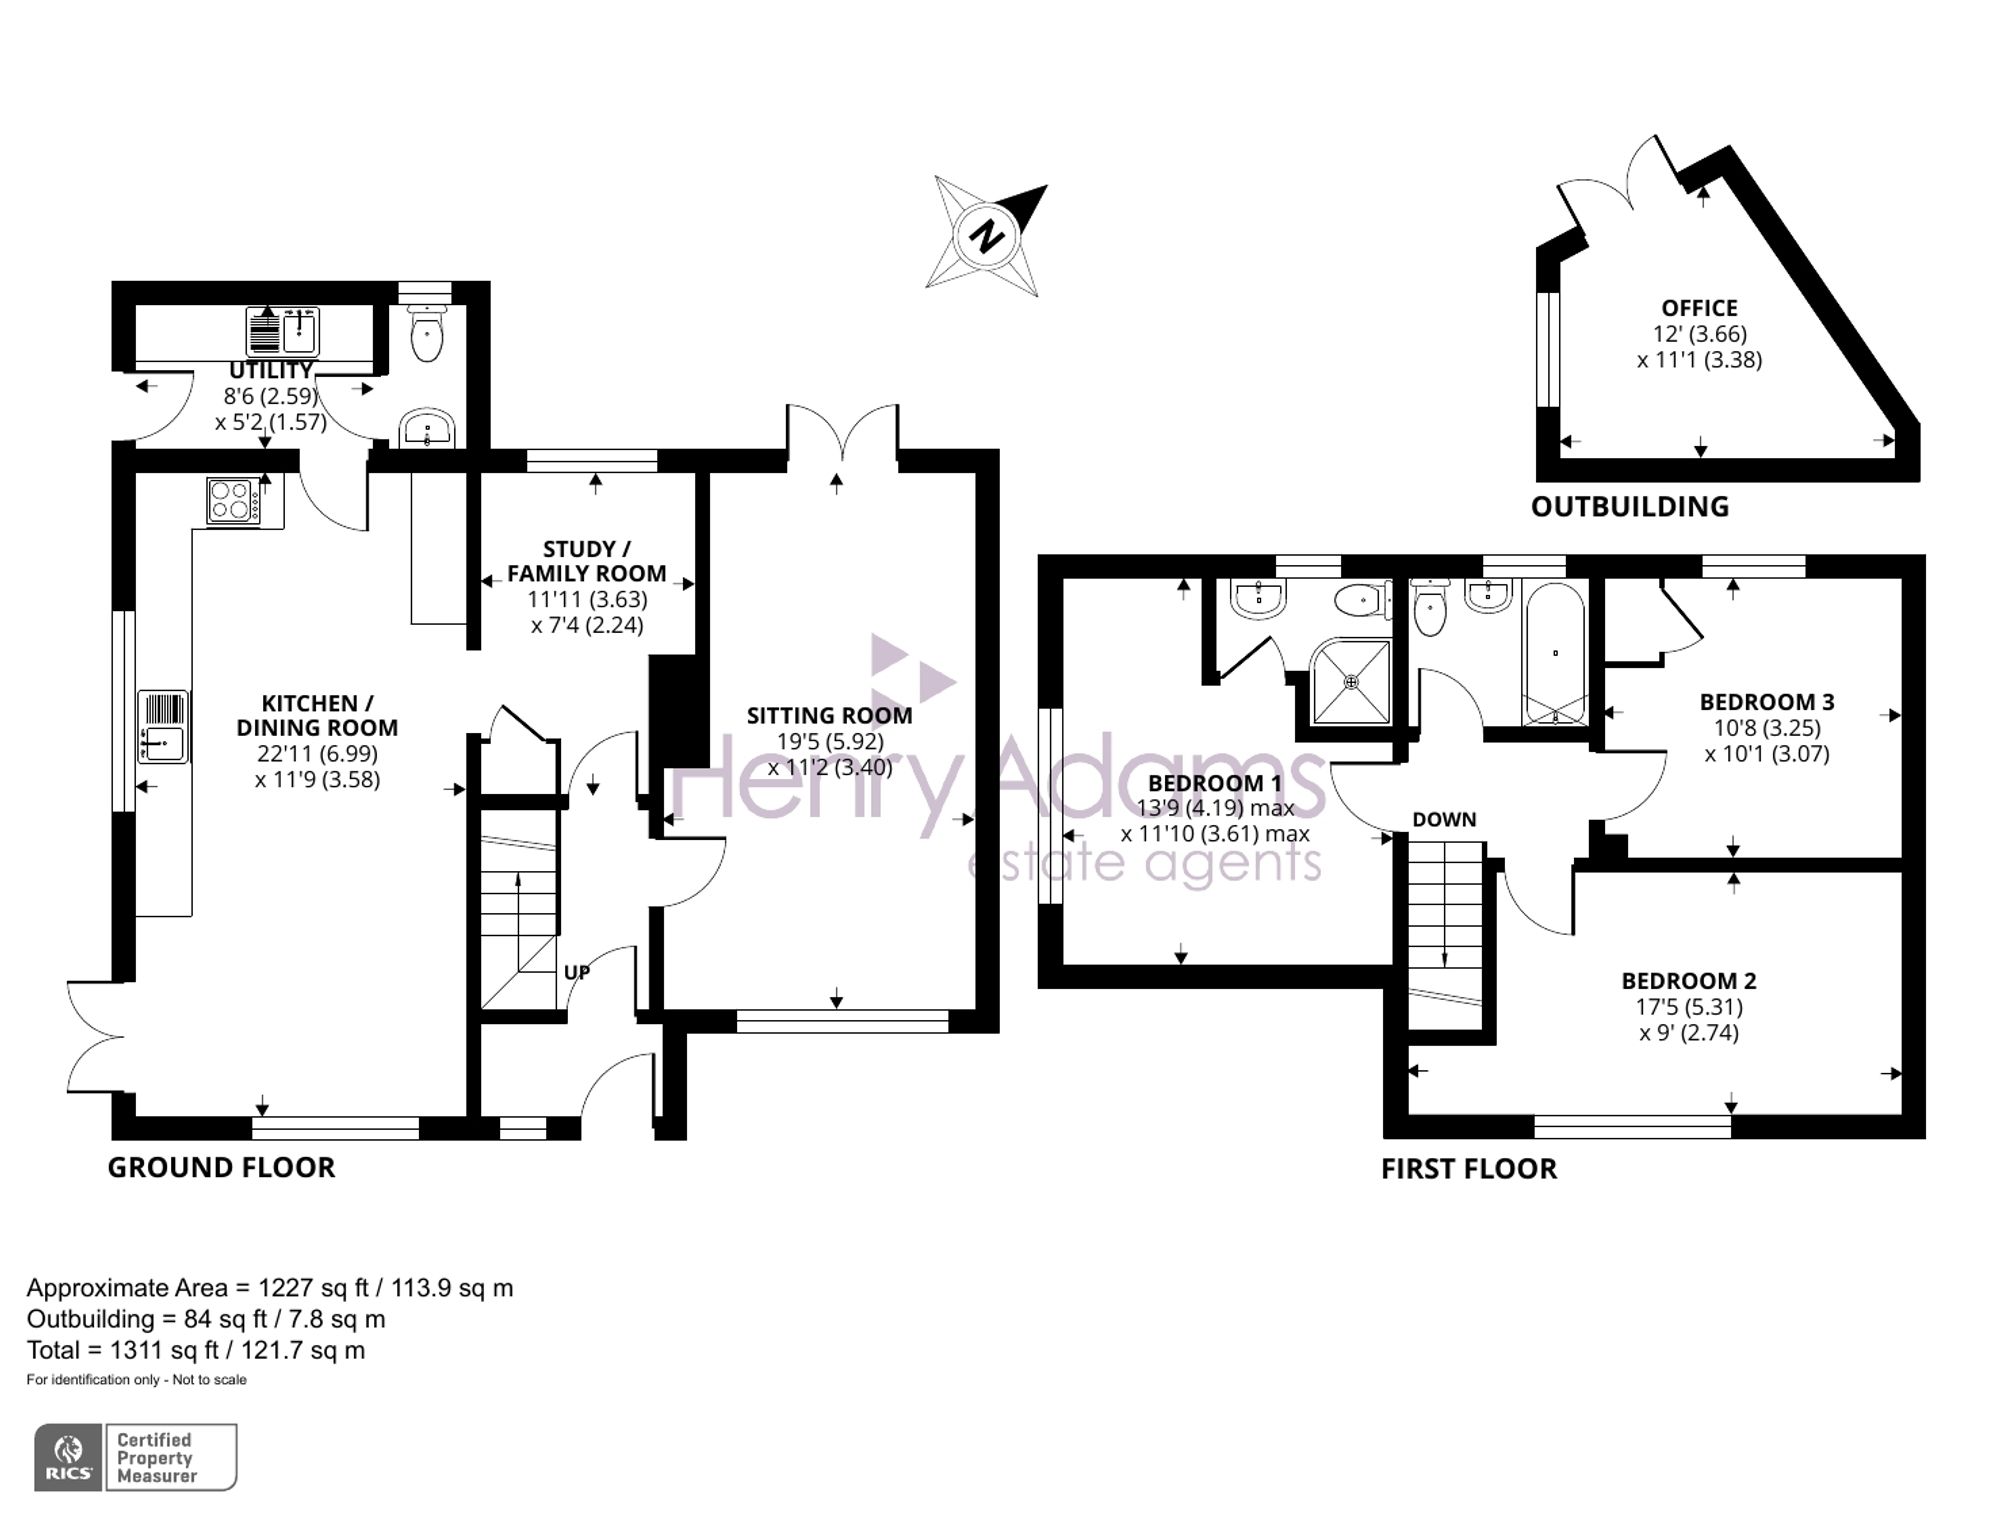 Oliver Whitby Road, Chichester, PO19 floorplans